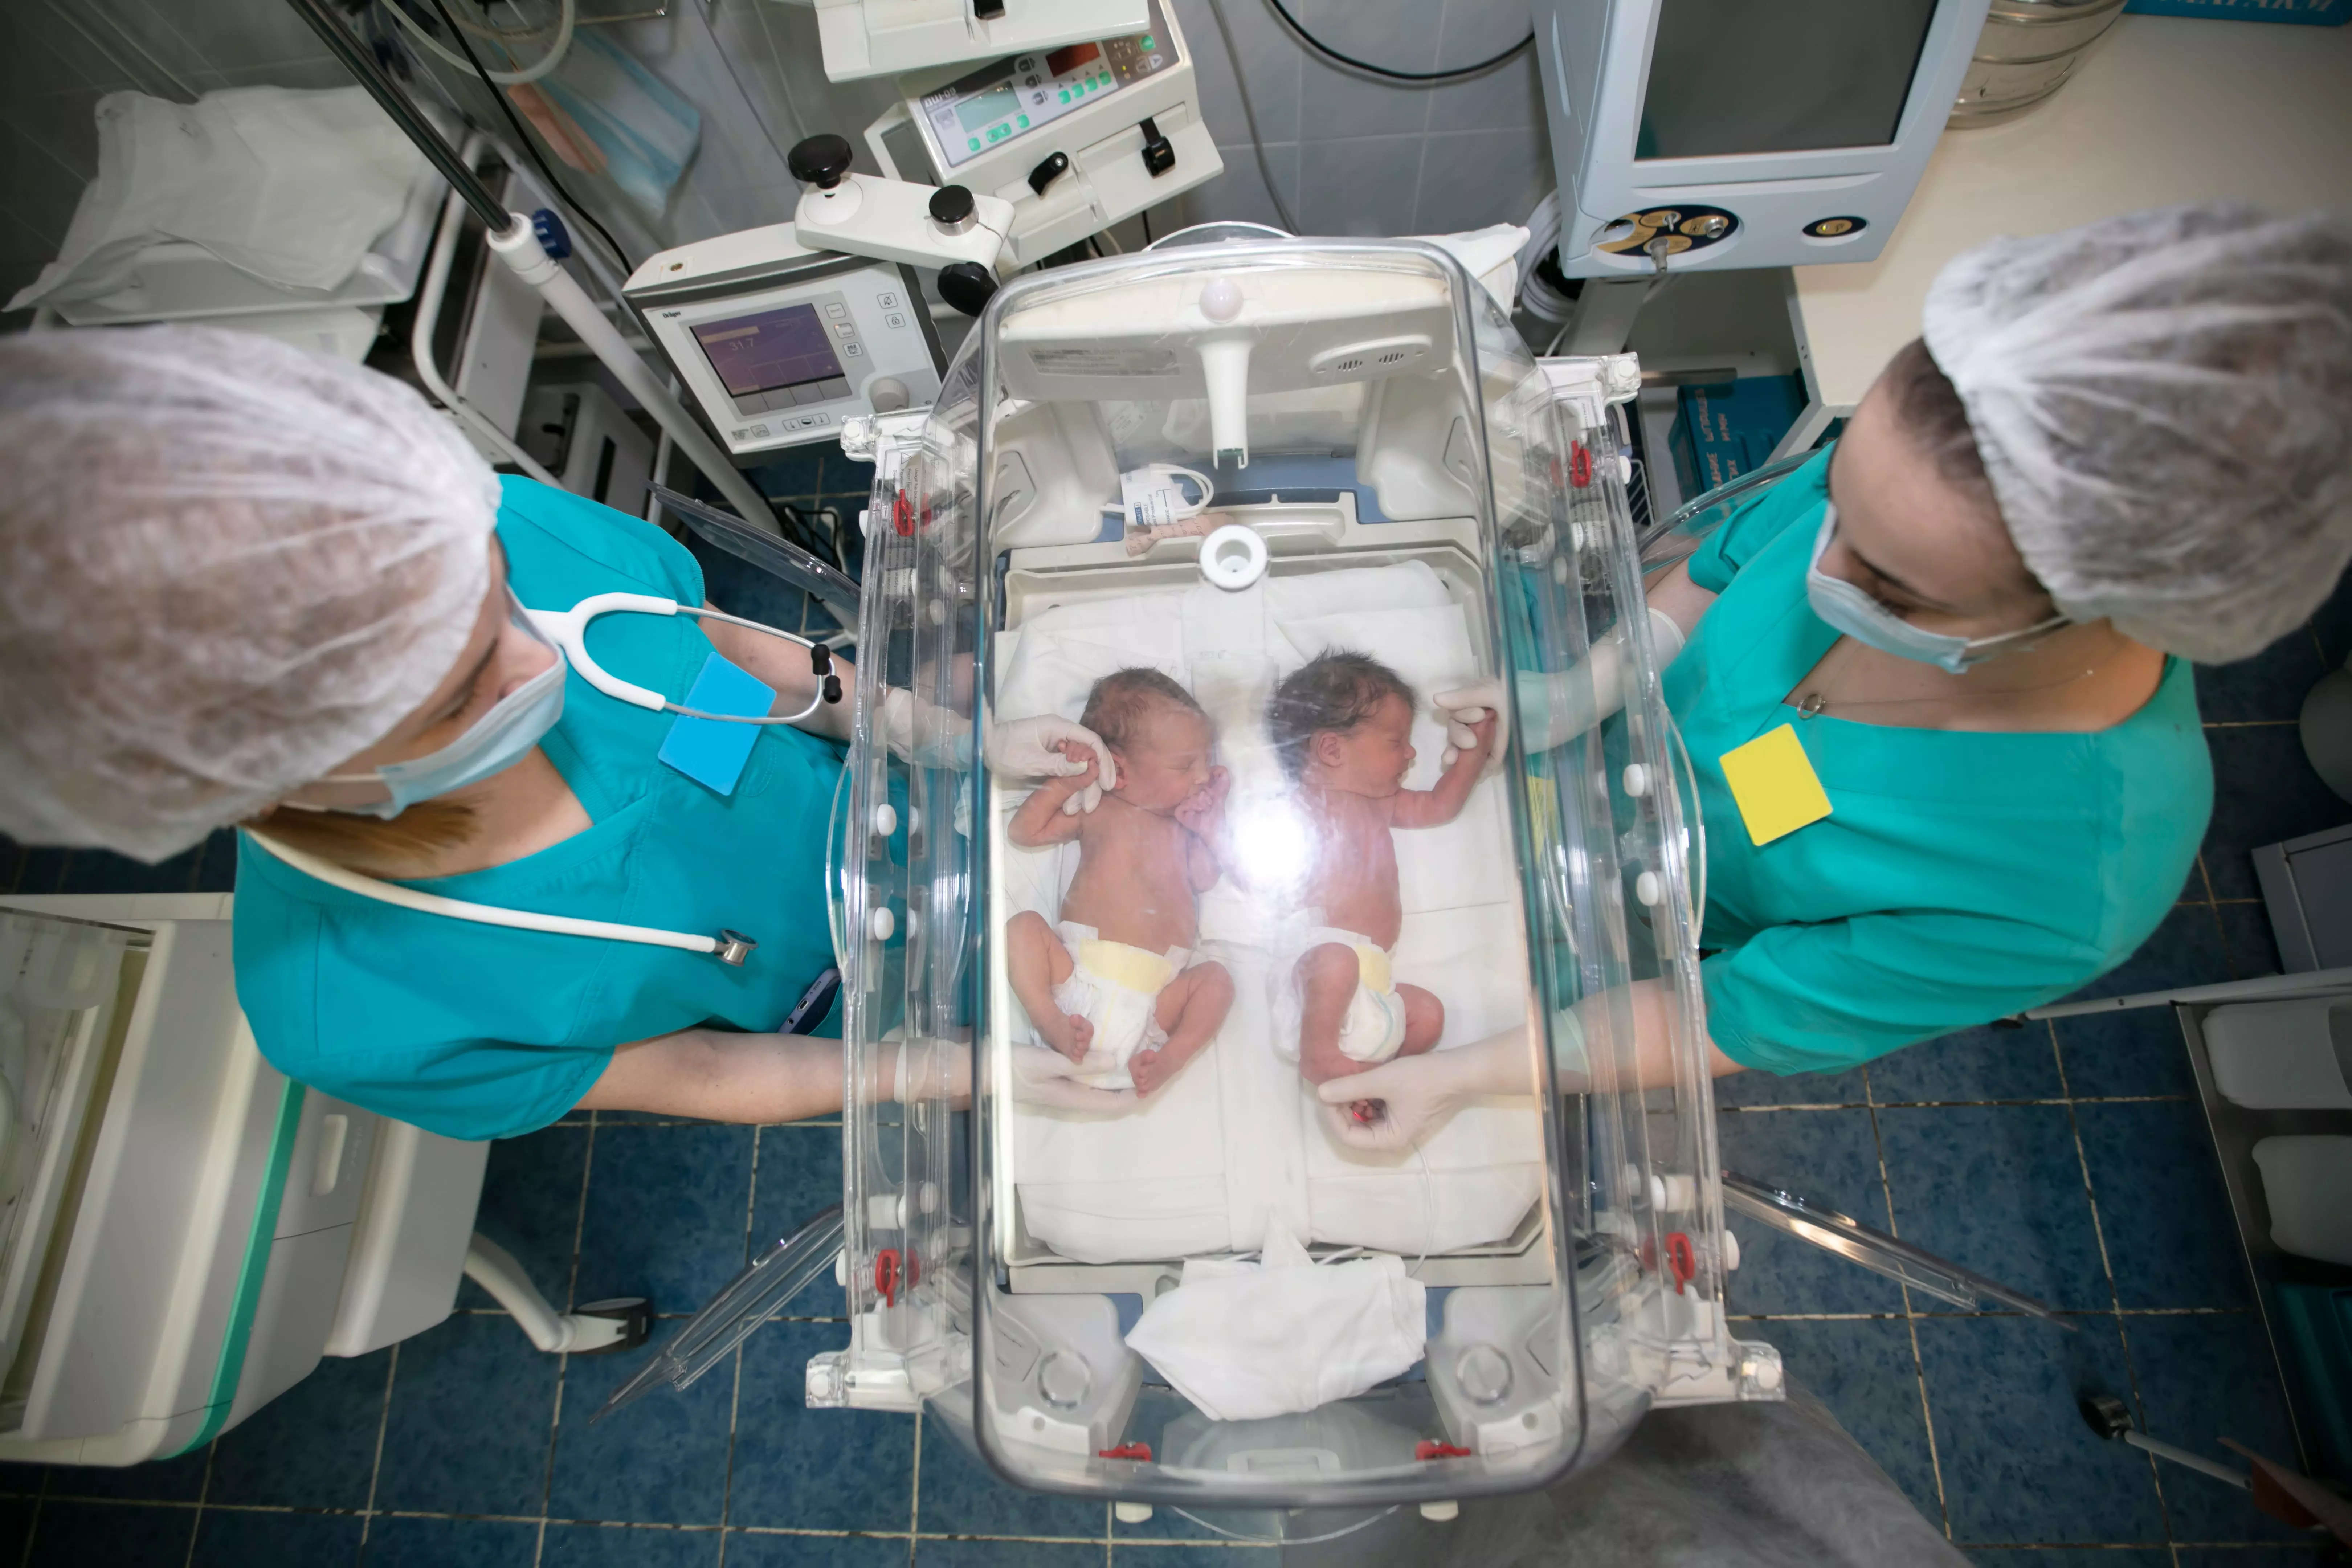 A 70 Year Old Woman In Uganda Gave Birth To Twins She Conceived Via Ivf